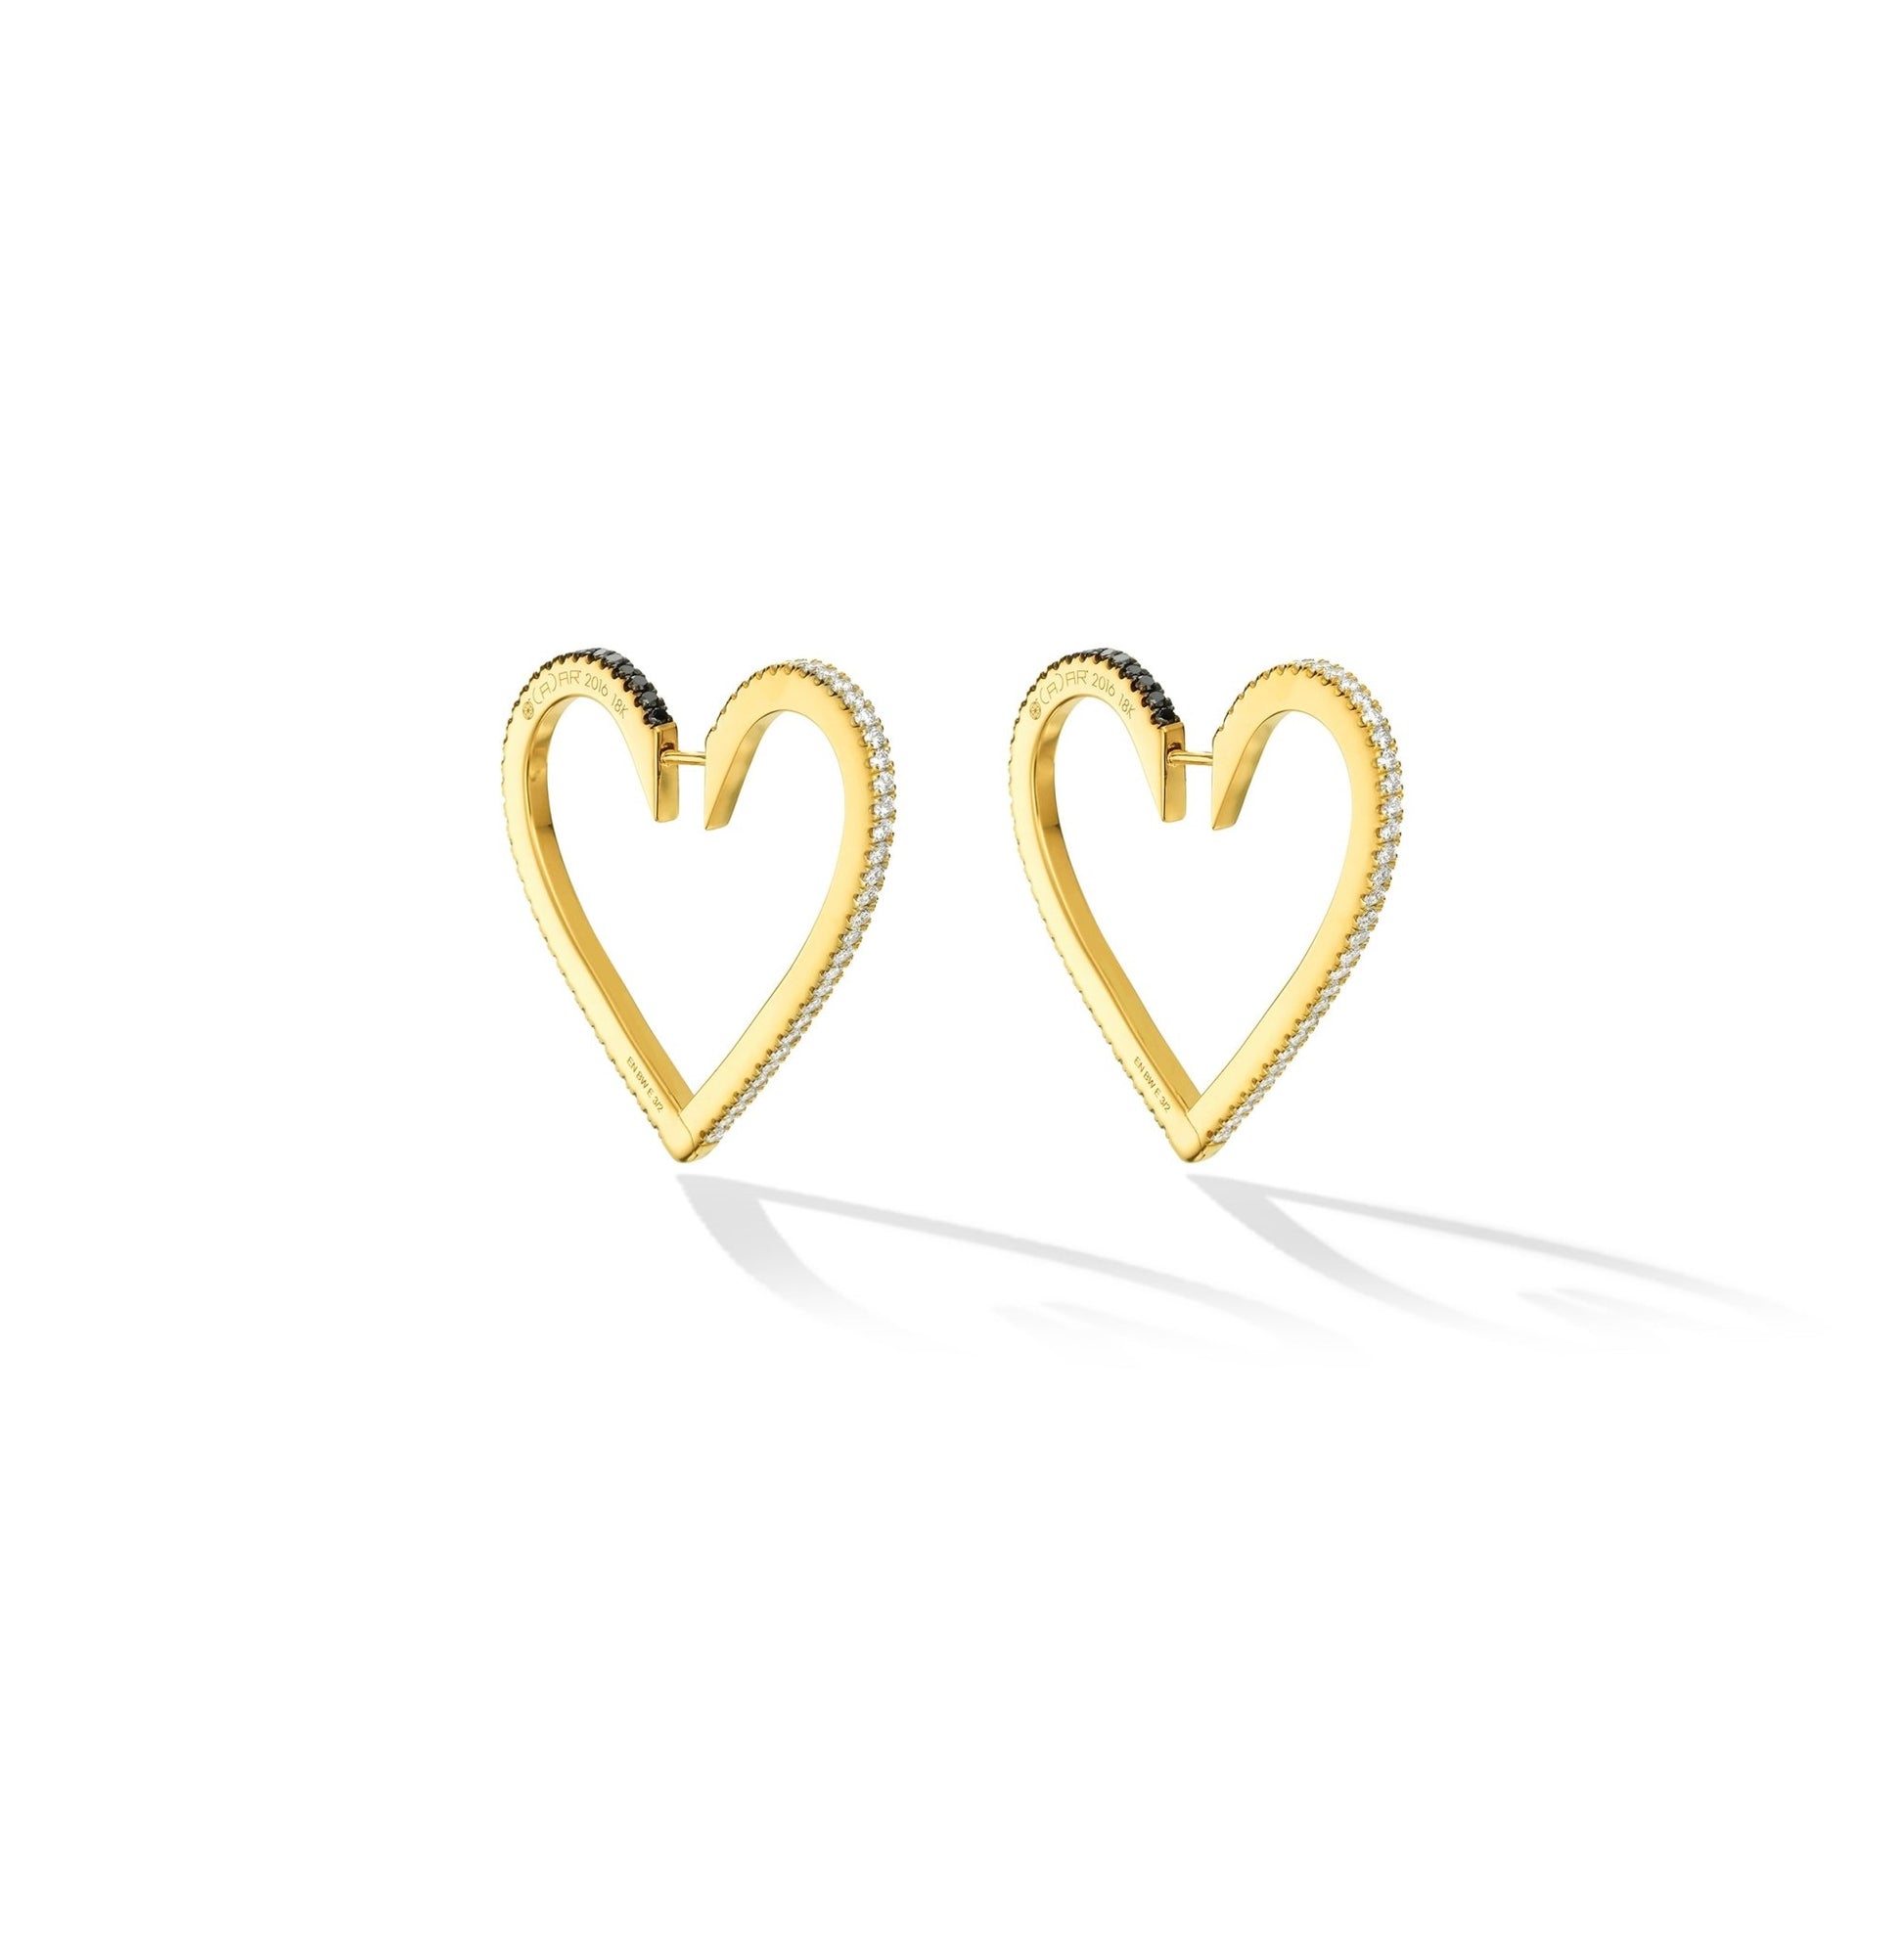 Large Yellow Gold Endless Hoop Earrings with Black and White Diamonds - Cadar